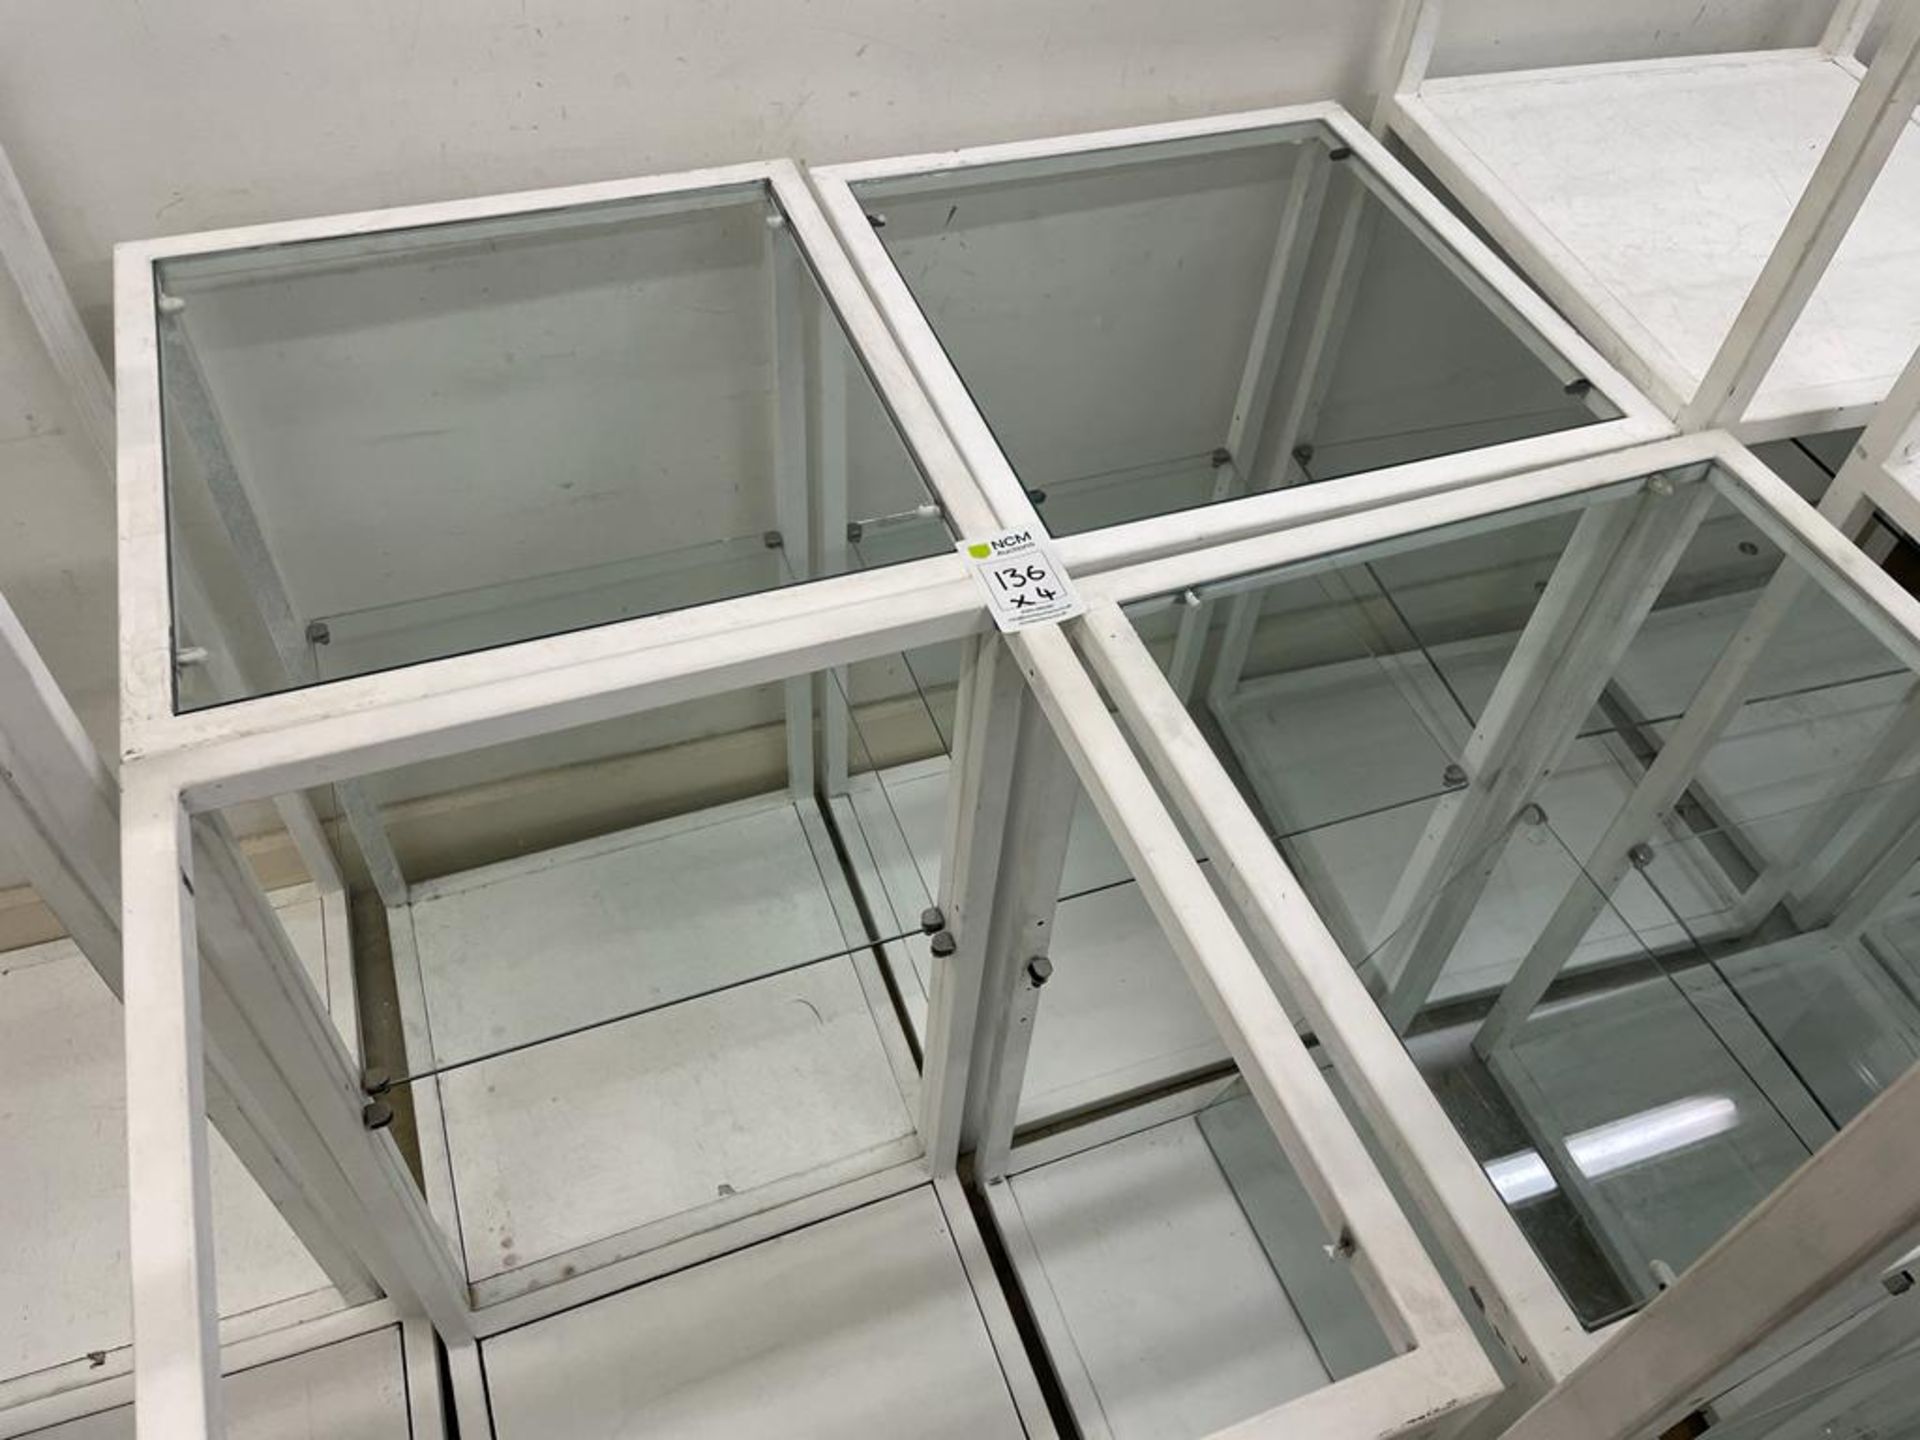 Small White Meatal Display Shelves with Glass